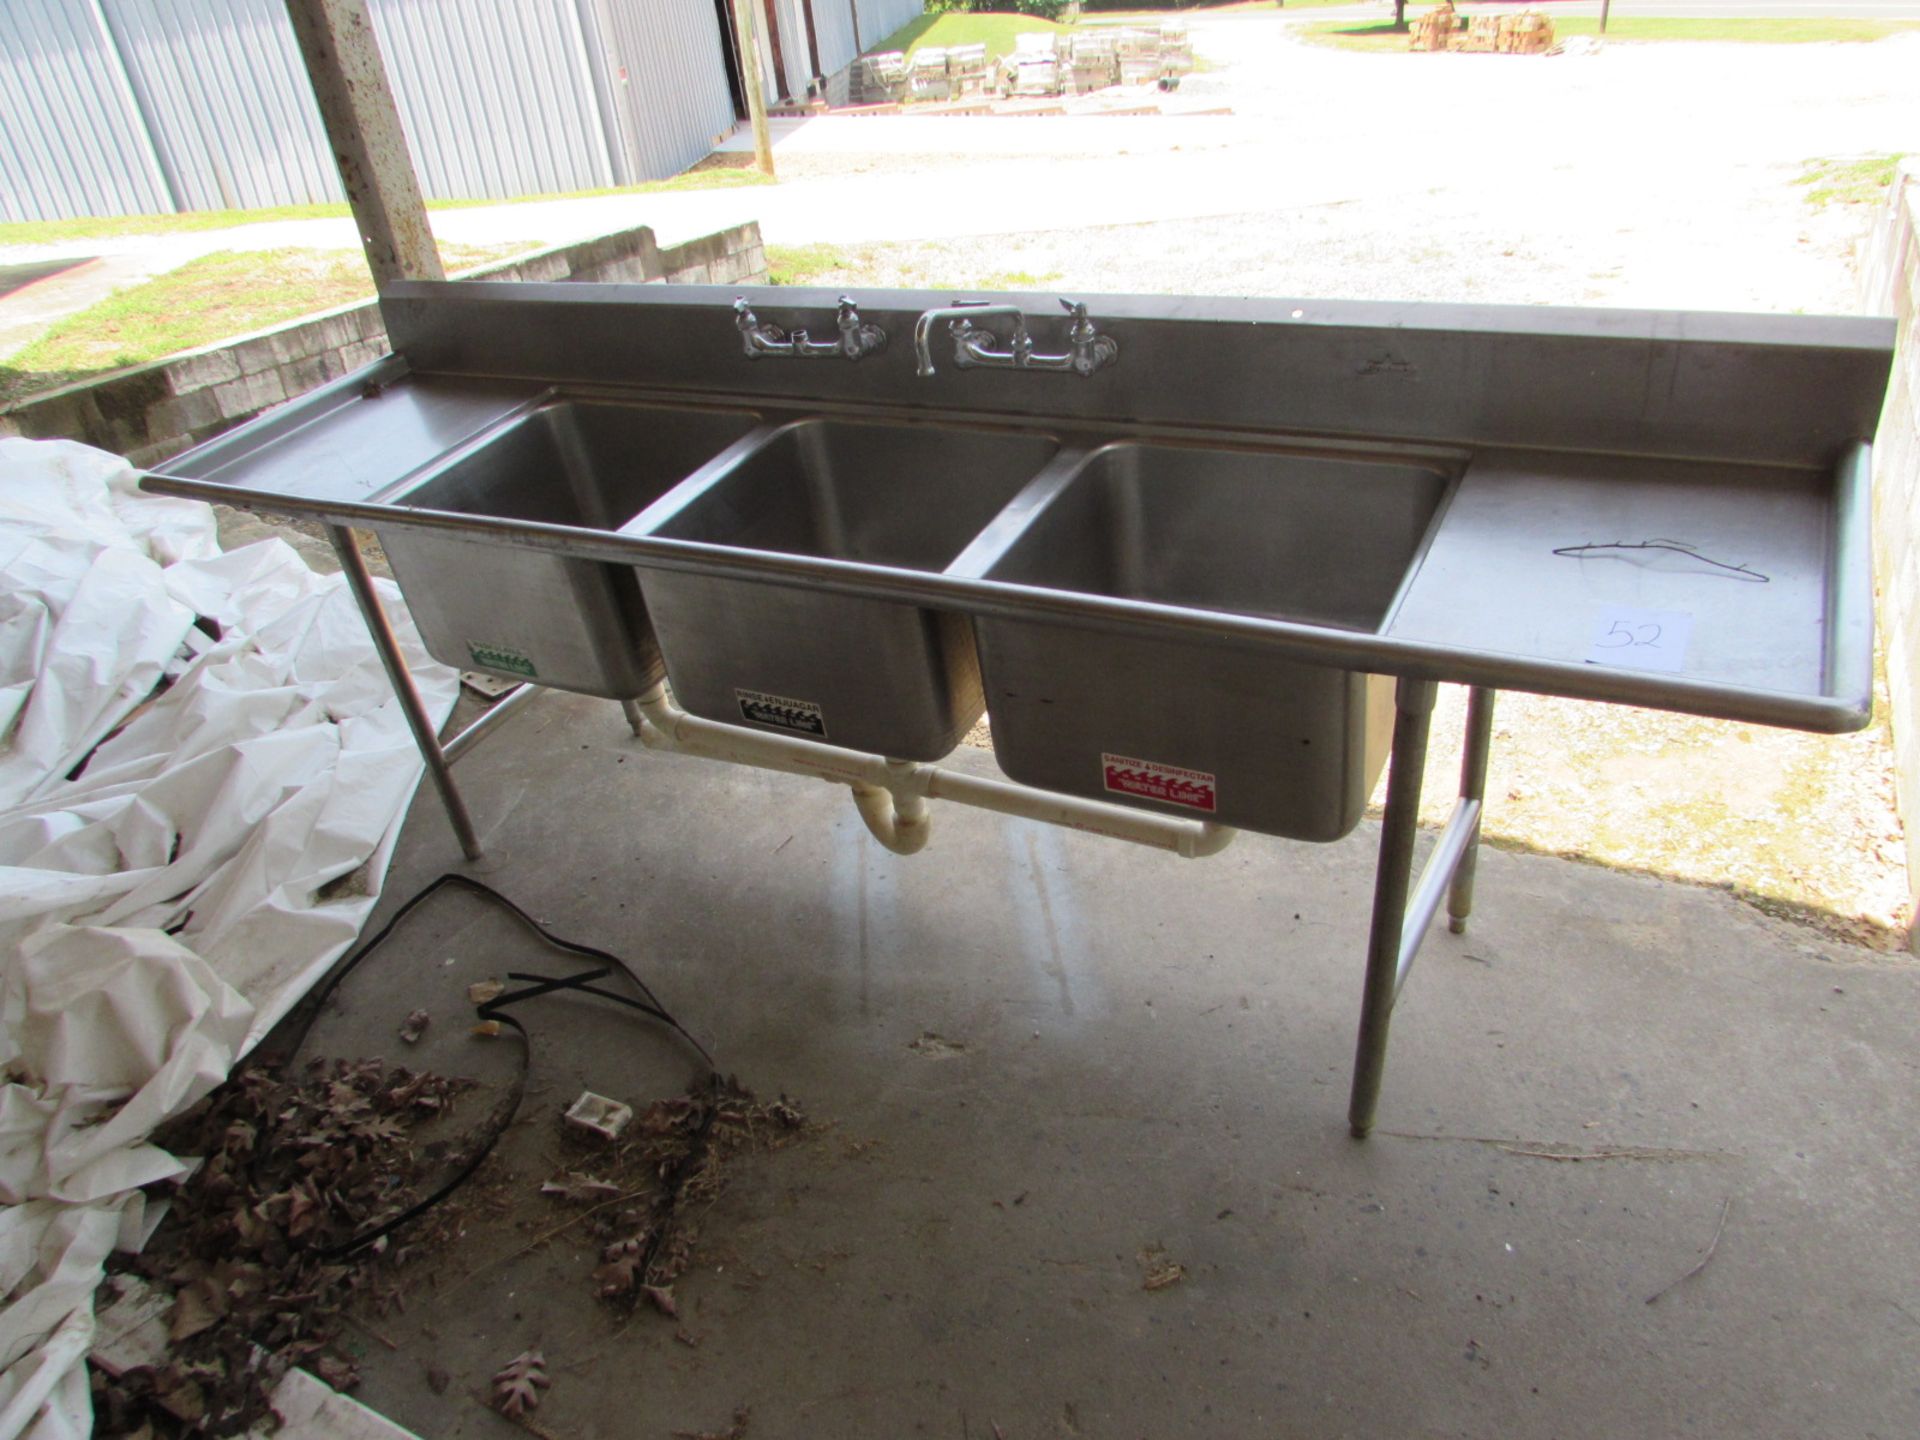 Stainless Steel Sink 3 Compartment with 2 Drainboards and Legs